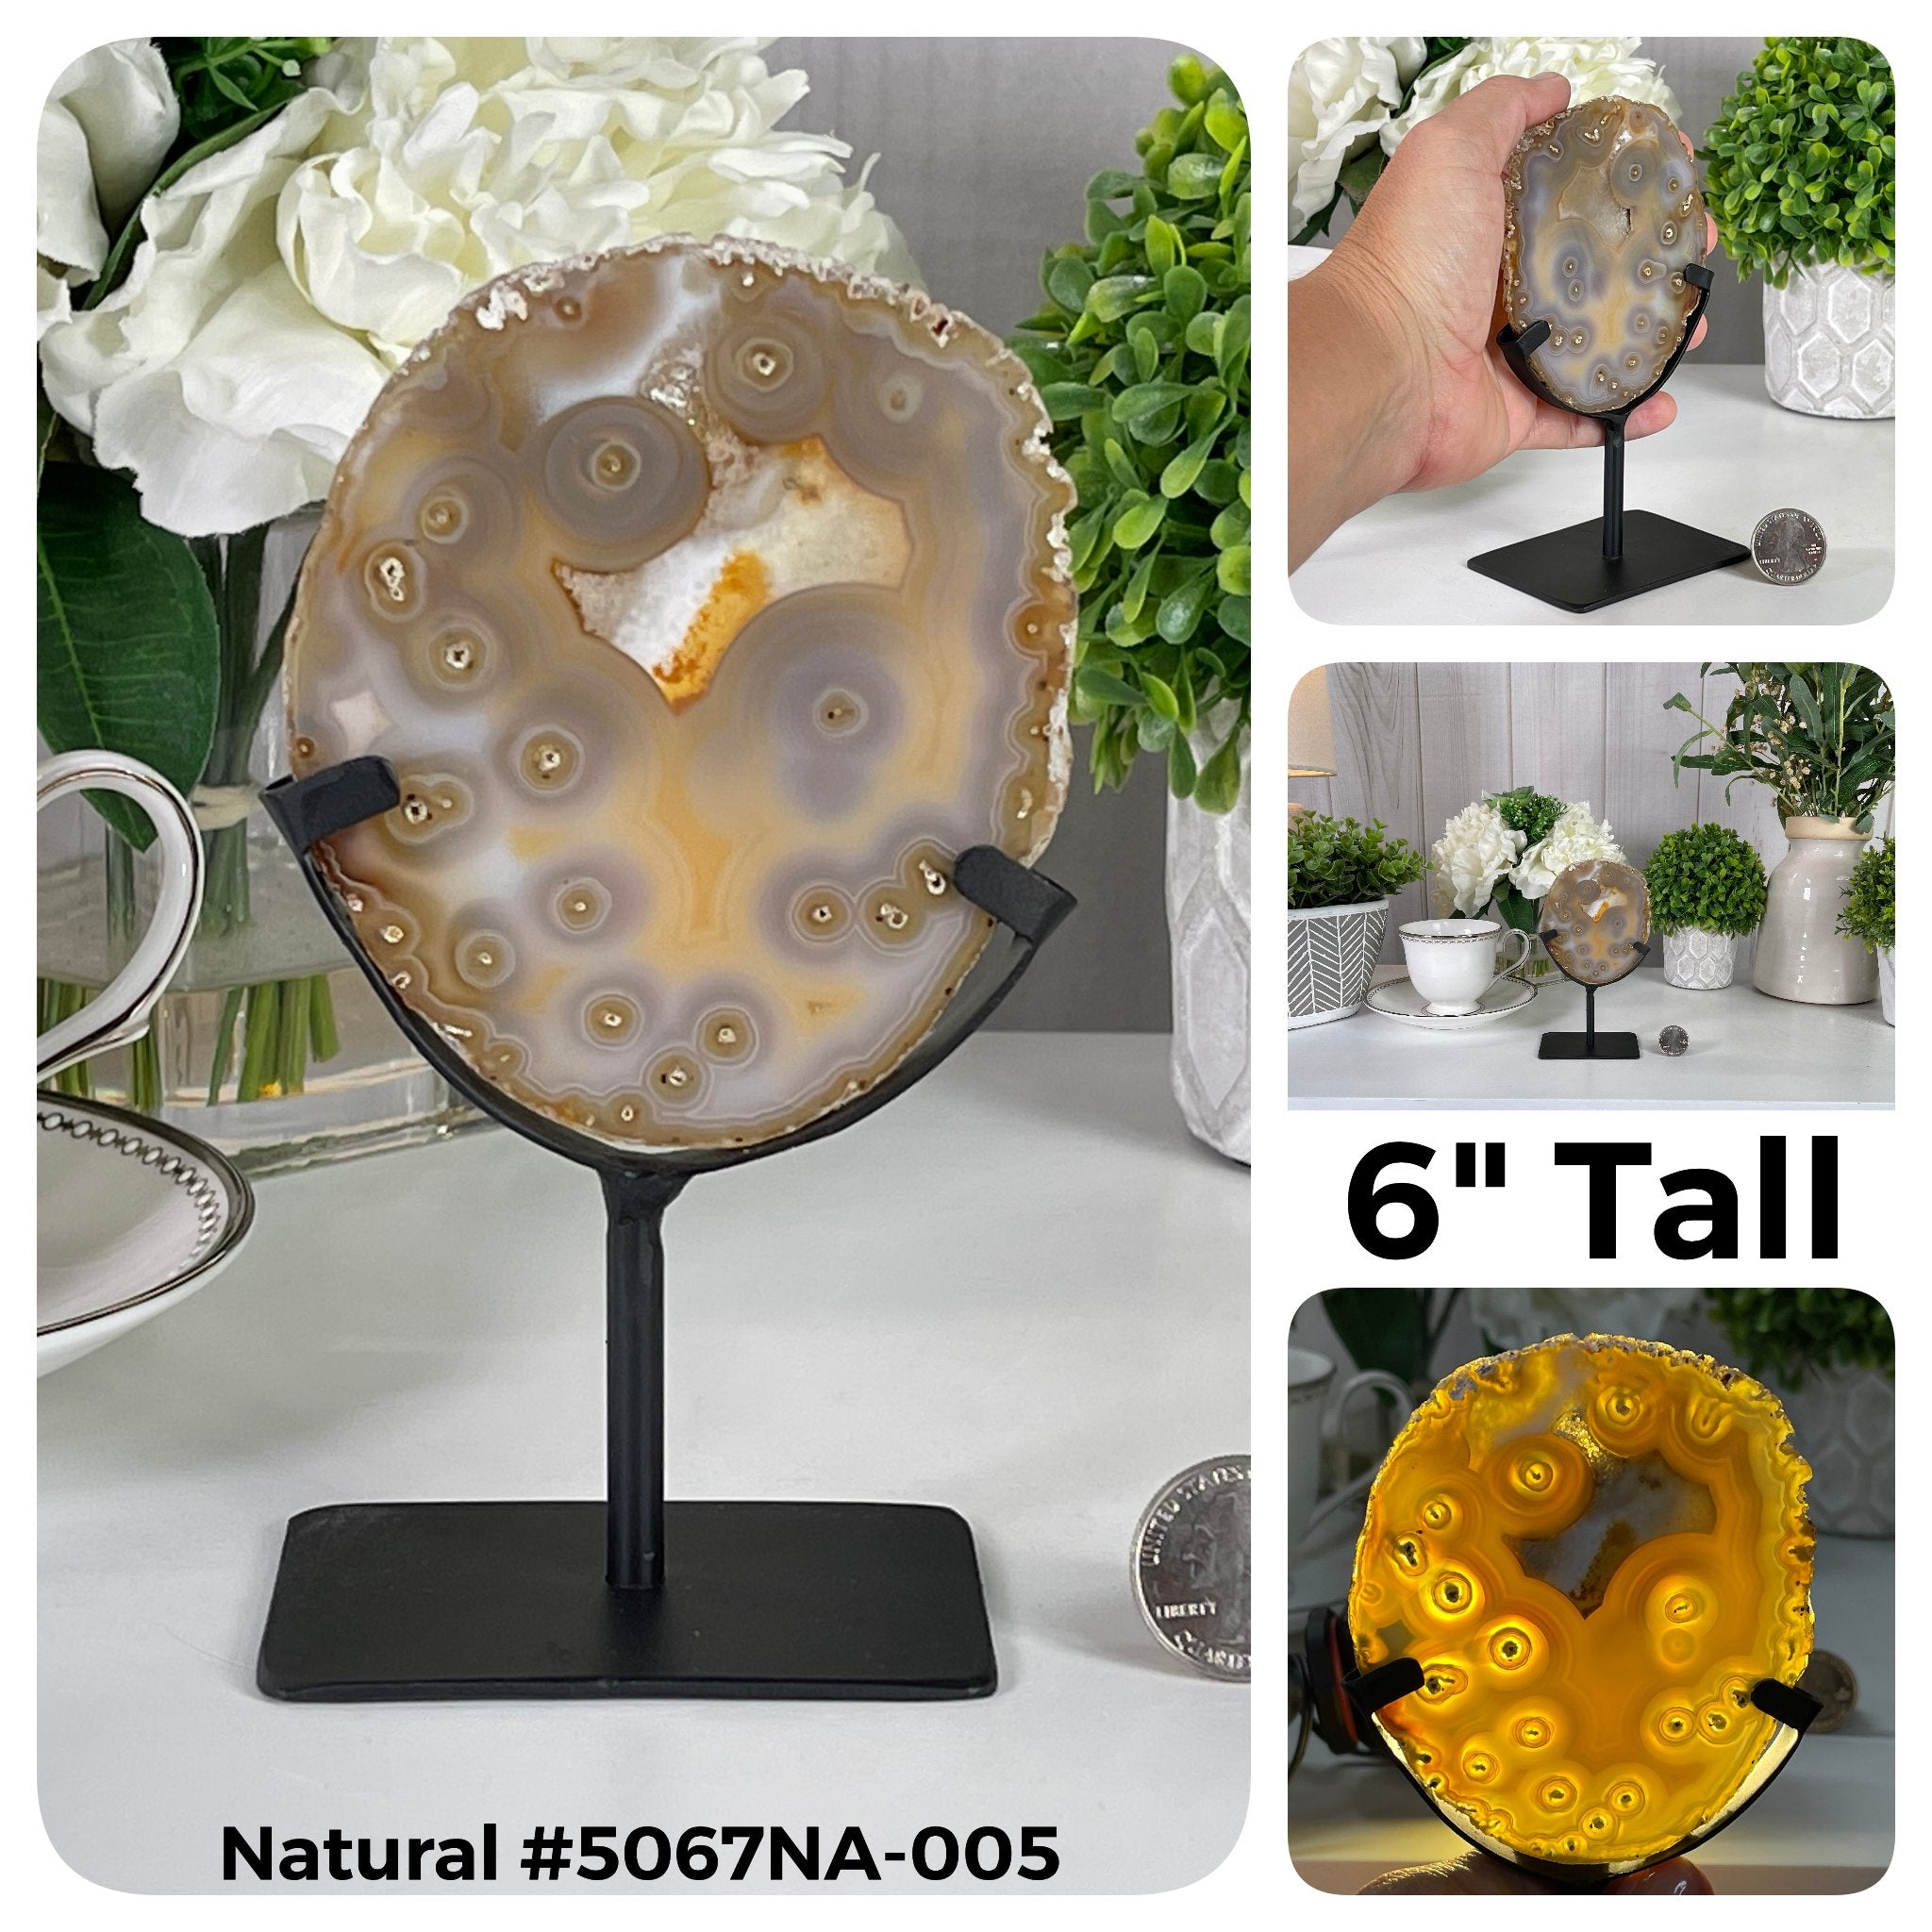 Special Smaller Natural Brazilian Agate Slices on Metal Stands Model #5067 by Brazil Gems - Brazil GemsBrazil GemsSpecial Smaller Natural Brazilian Agate Slices on Metal Stands Model #5067 by Brazil GemsSlices on Fixed Bases5067NA-005